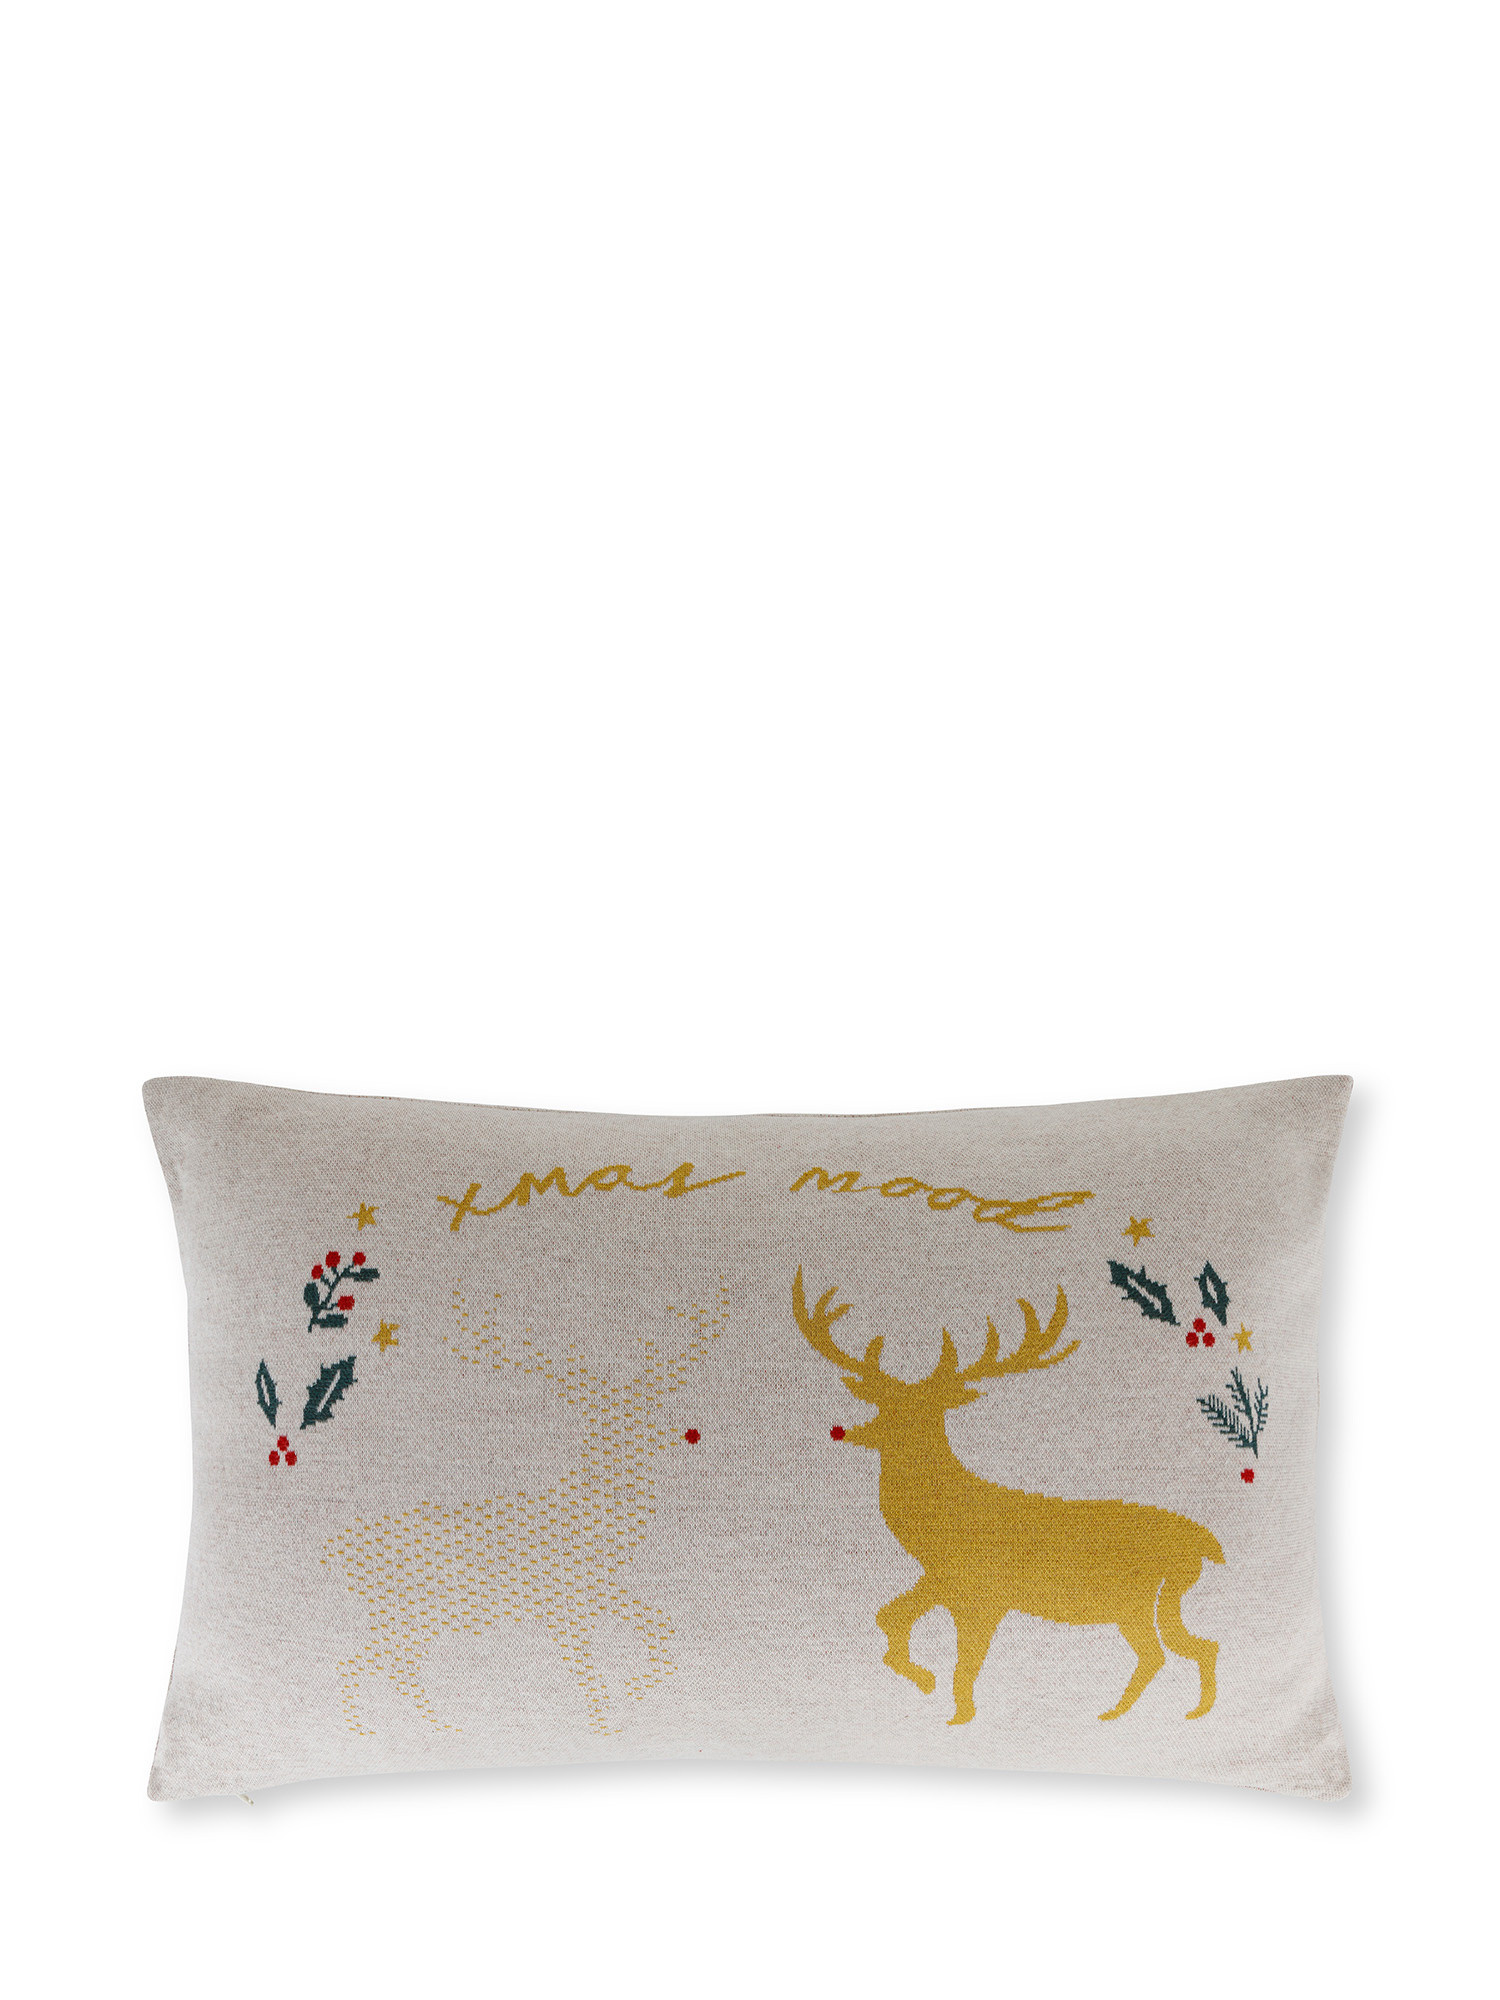 Jacquard knit cushion with reindeer 40x60 cm, White, large image number 0